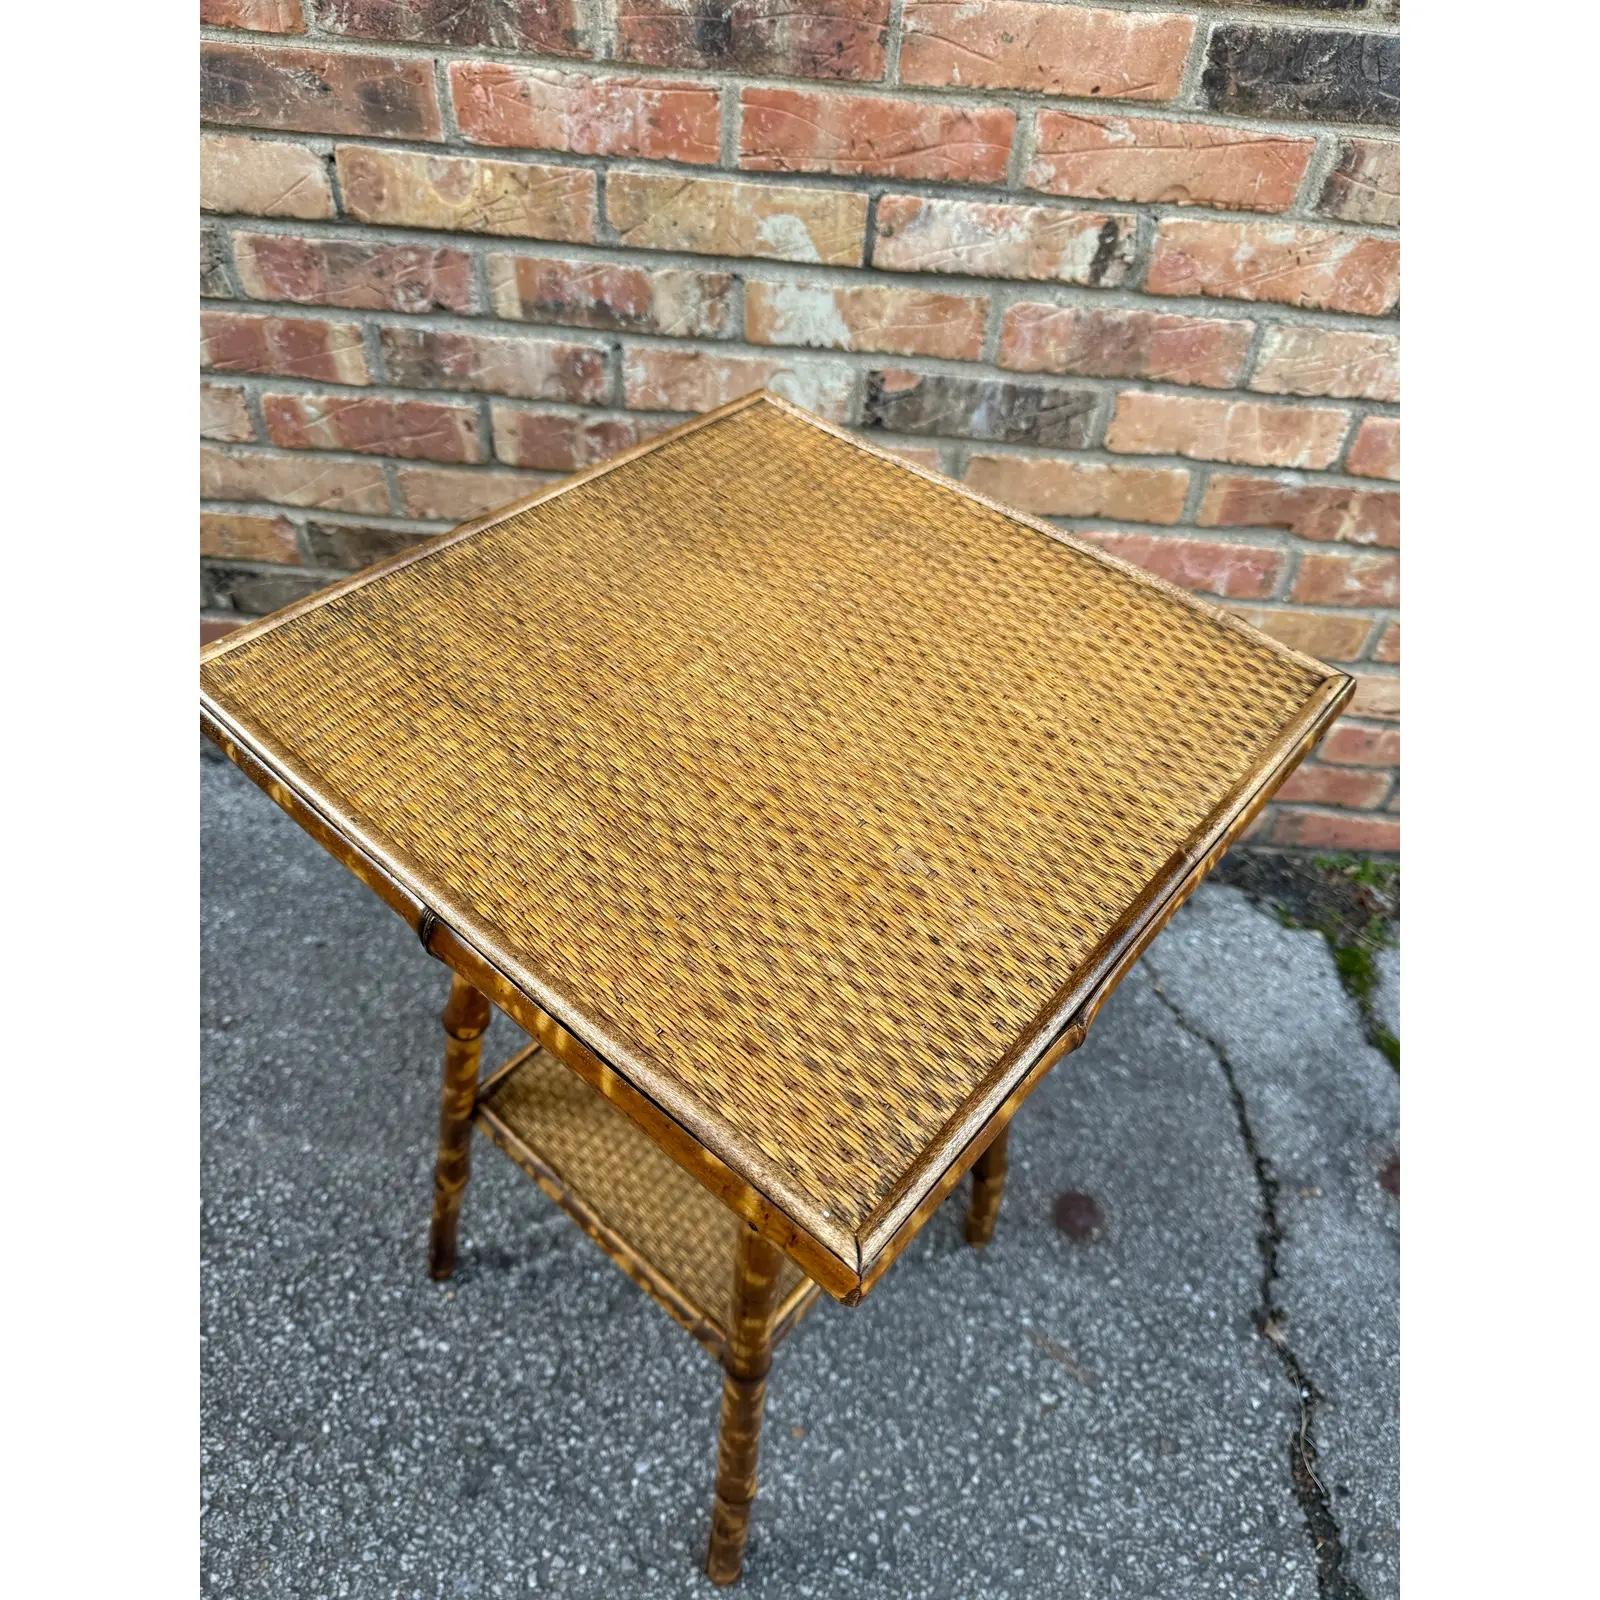 This is a beautiful 19th century English bamboo side table! Tables like these make excellent accent pieces because their color and style is so versatile. The dark hues of the burnt bamboo pair perfectly with the lighter golden of the rattan top and